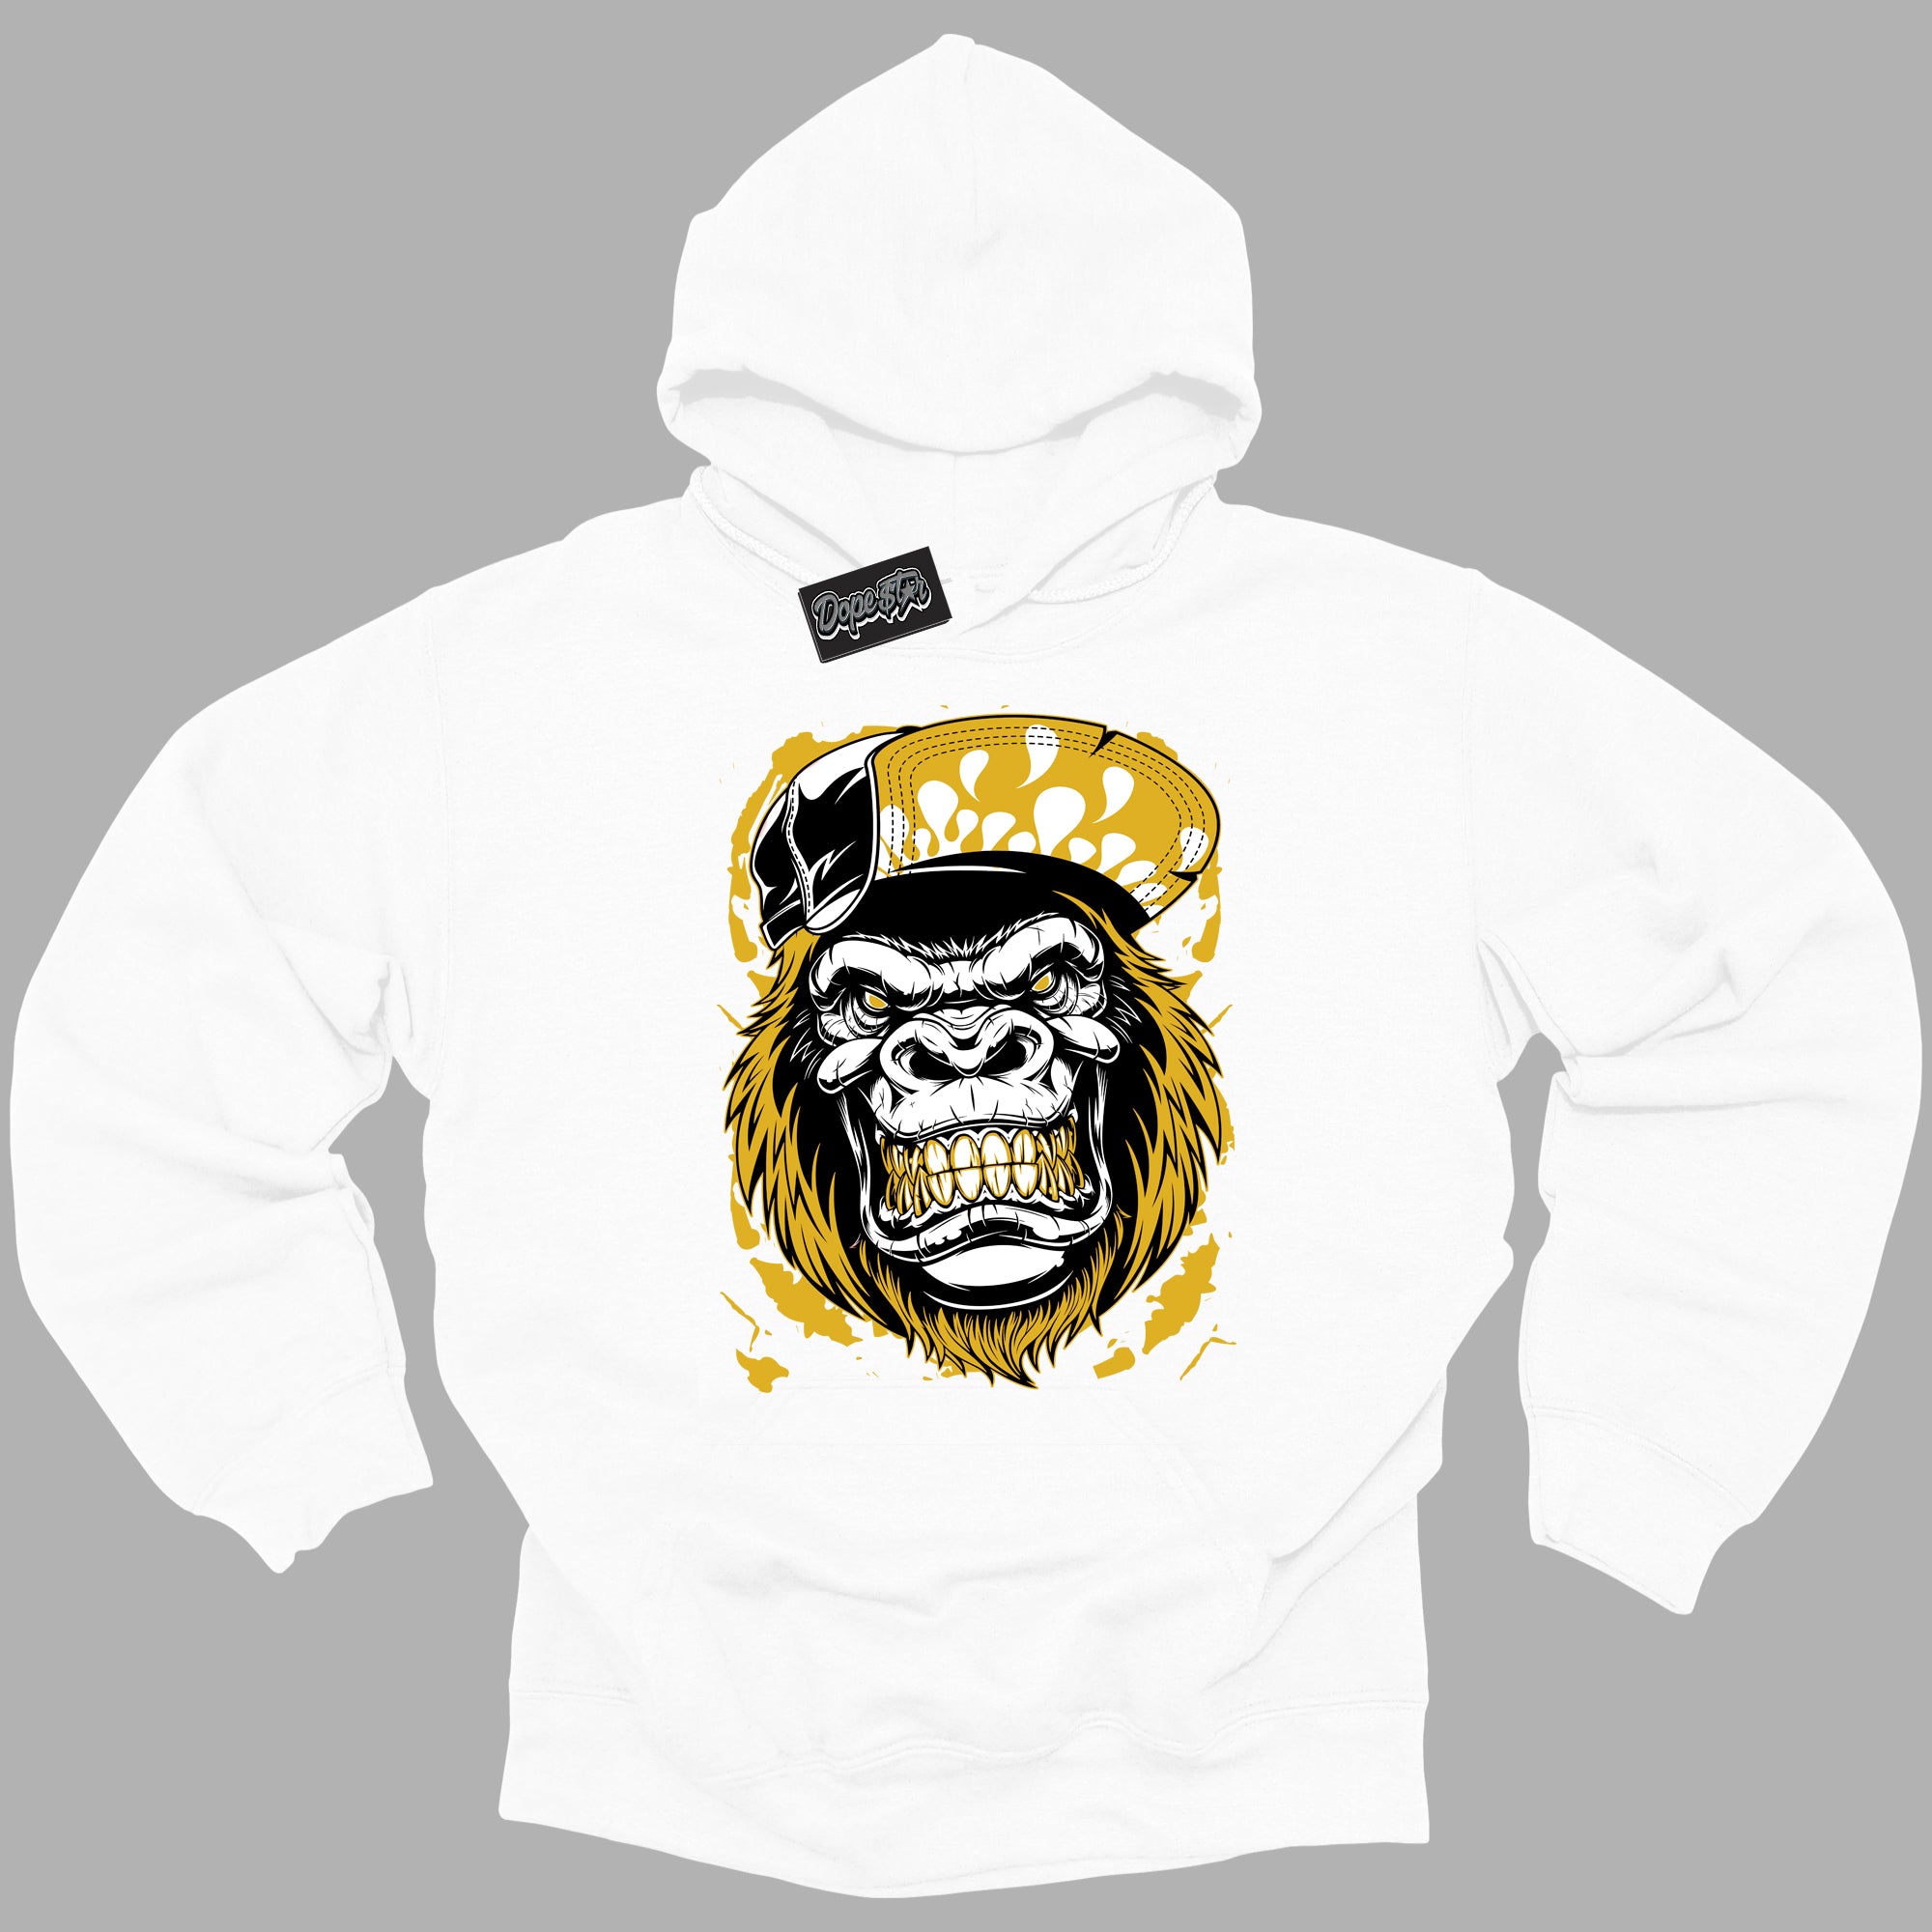 Cool White Hoodie with “ Gorilla Beast ”  design that Perfectly Matches Yellow Ochre 6s Sneakers.